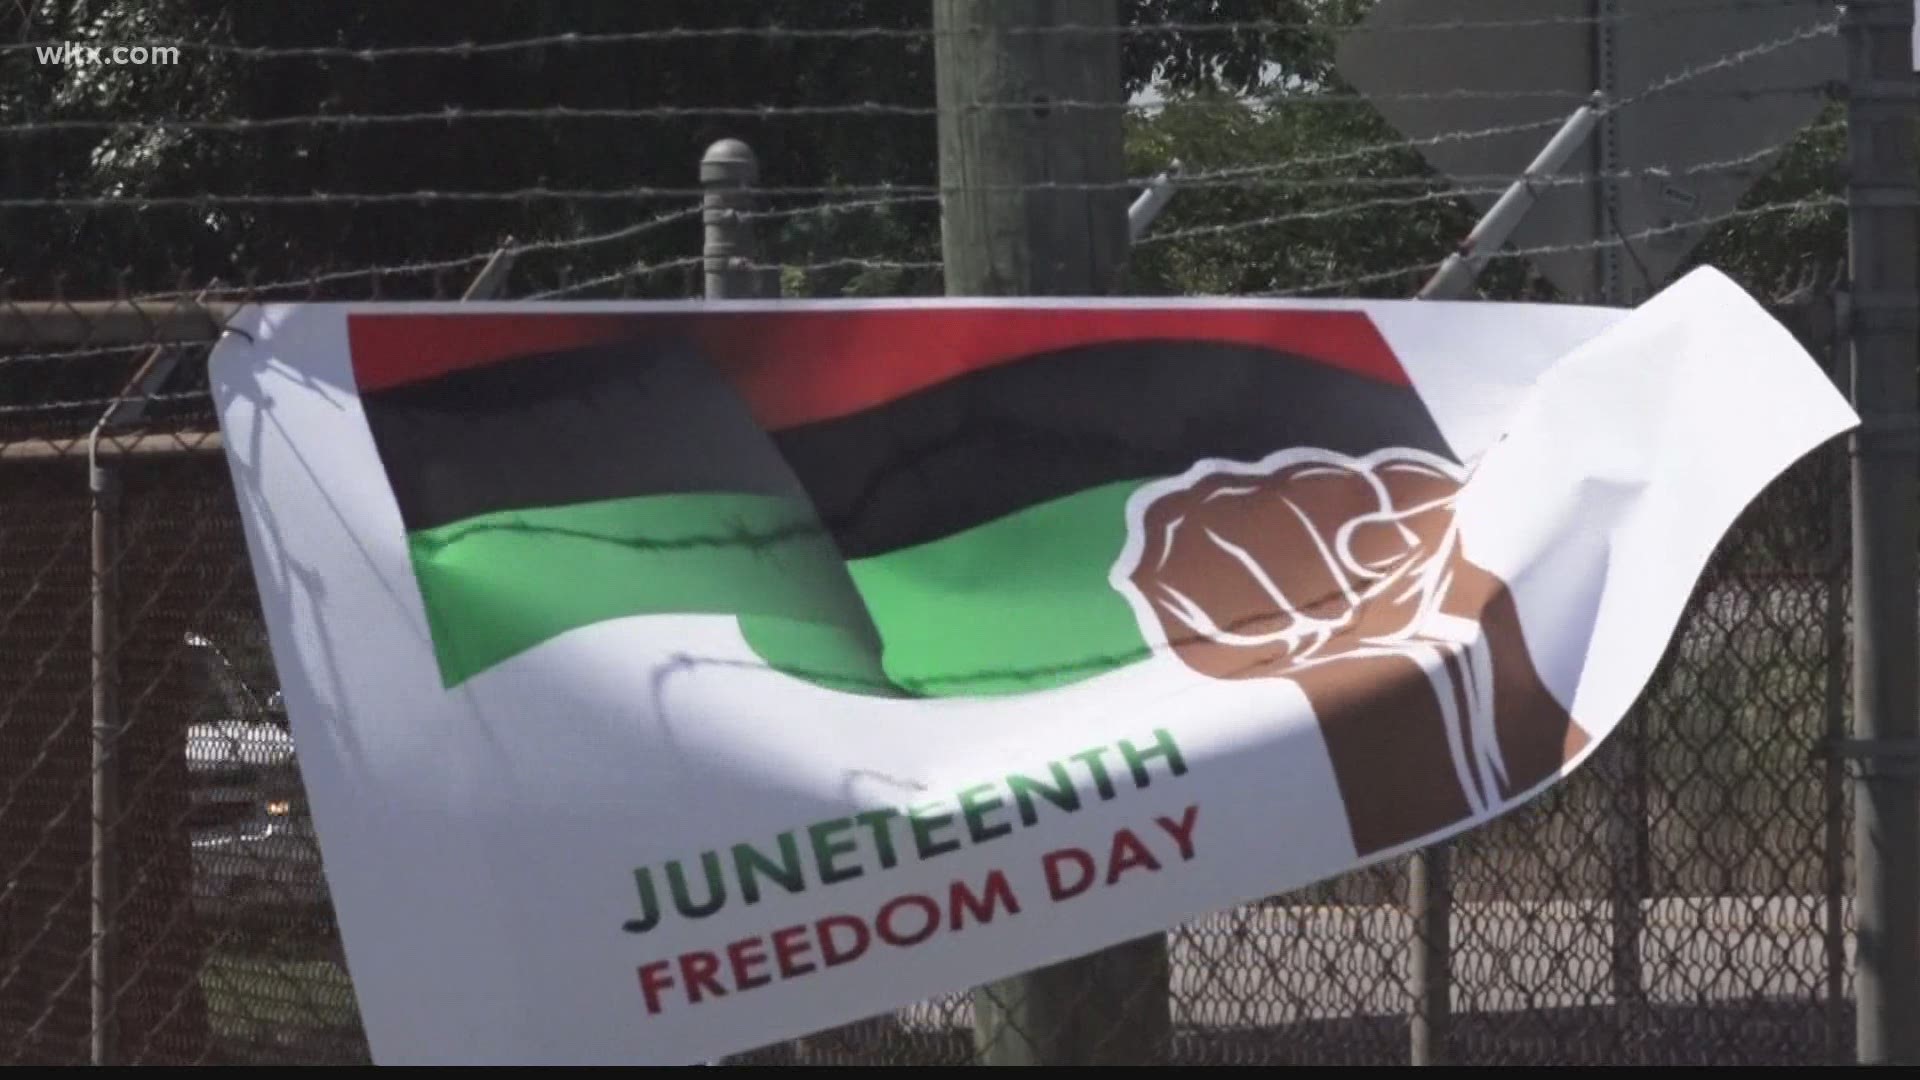 South Carolina State University students and professors are reflecting on what it means to celebrate Juneteenth as a national holiday.